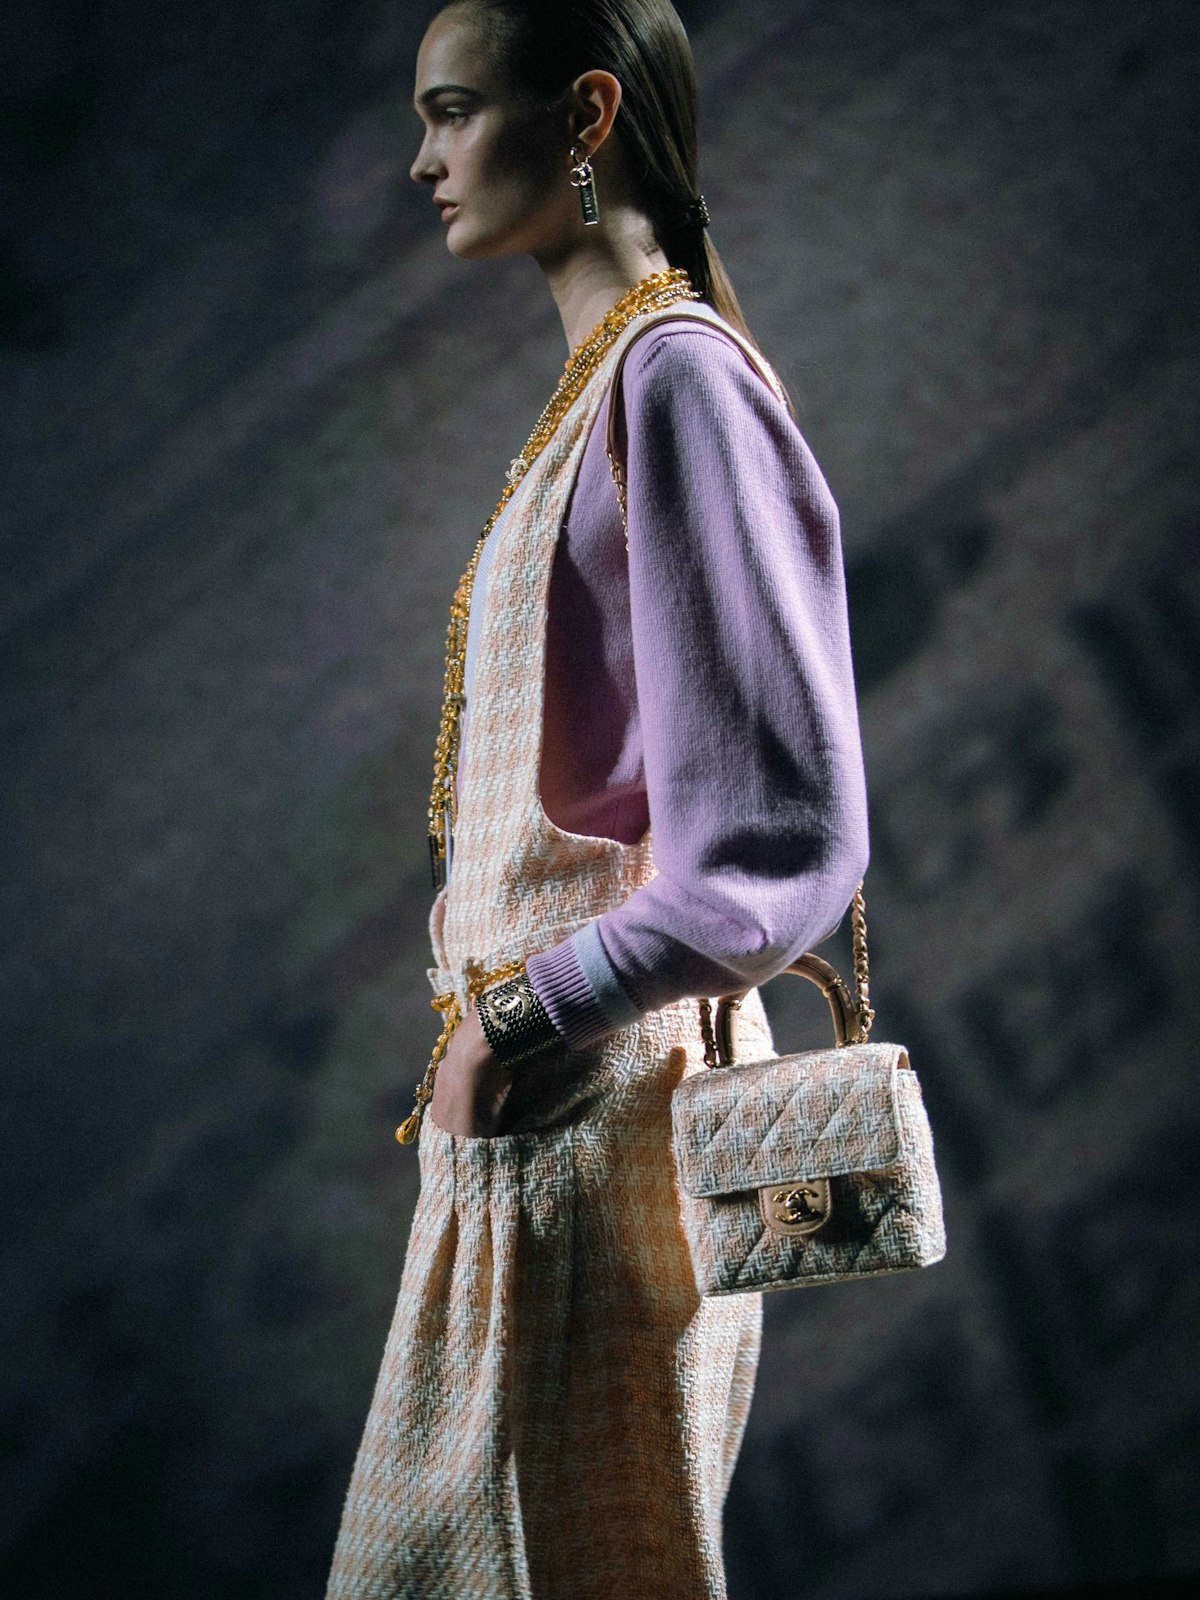 Chanel: iconic bags, accessories, and clothes to own - The Peak